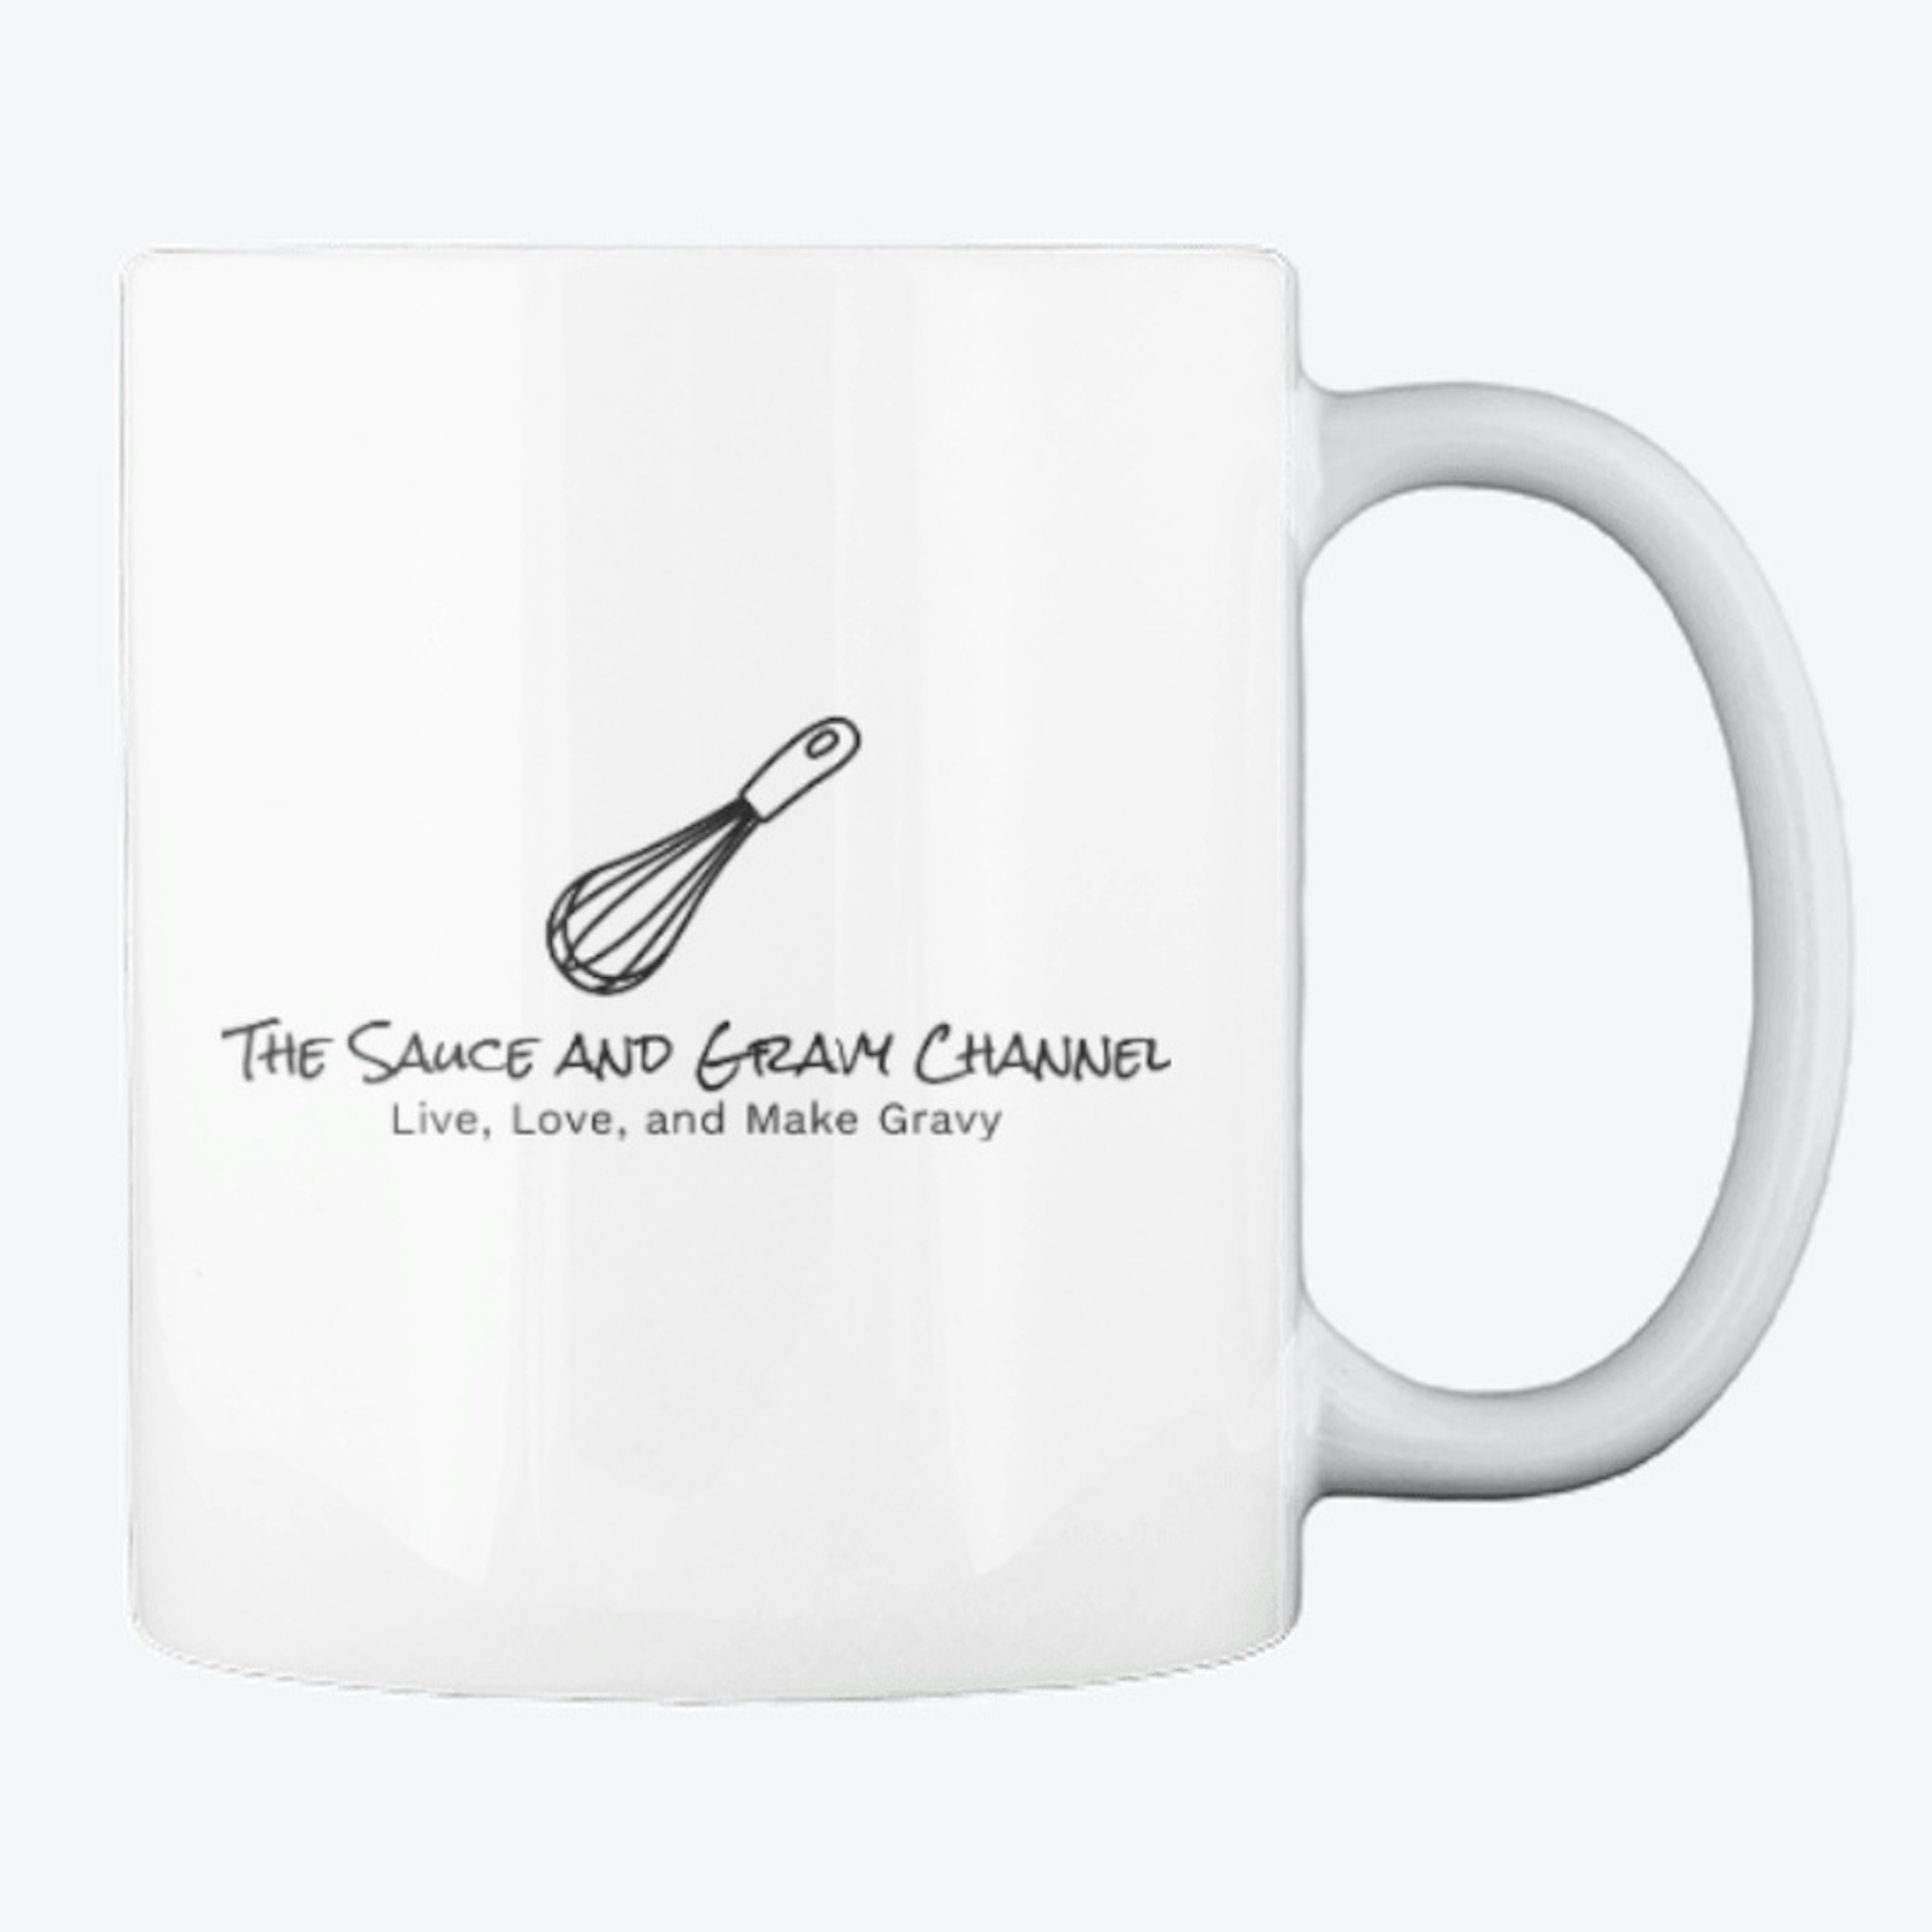 The Sauce and Gravy Channel Mug